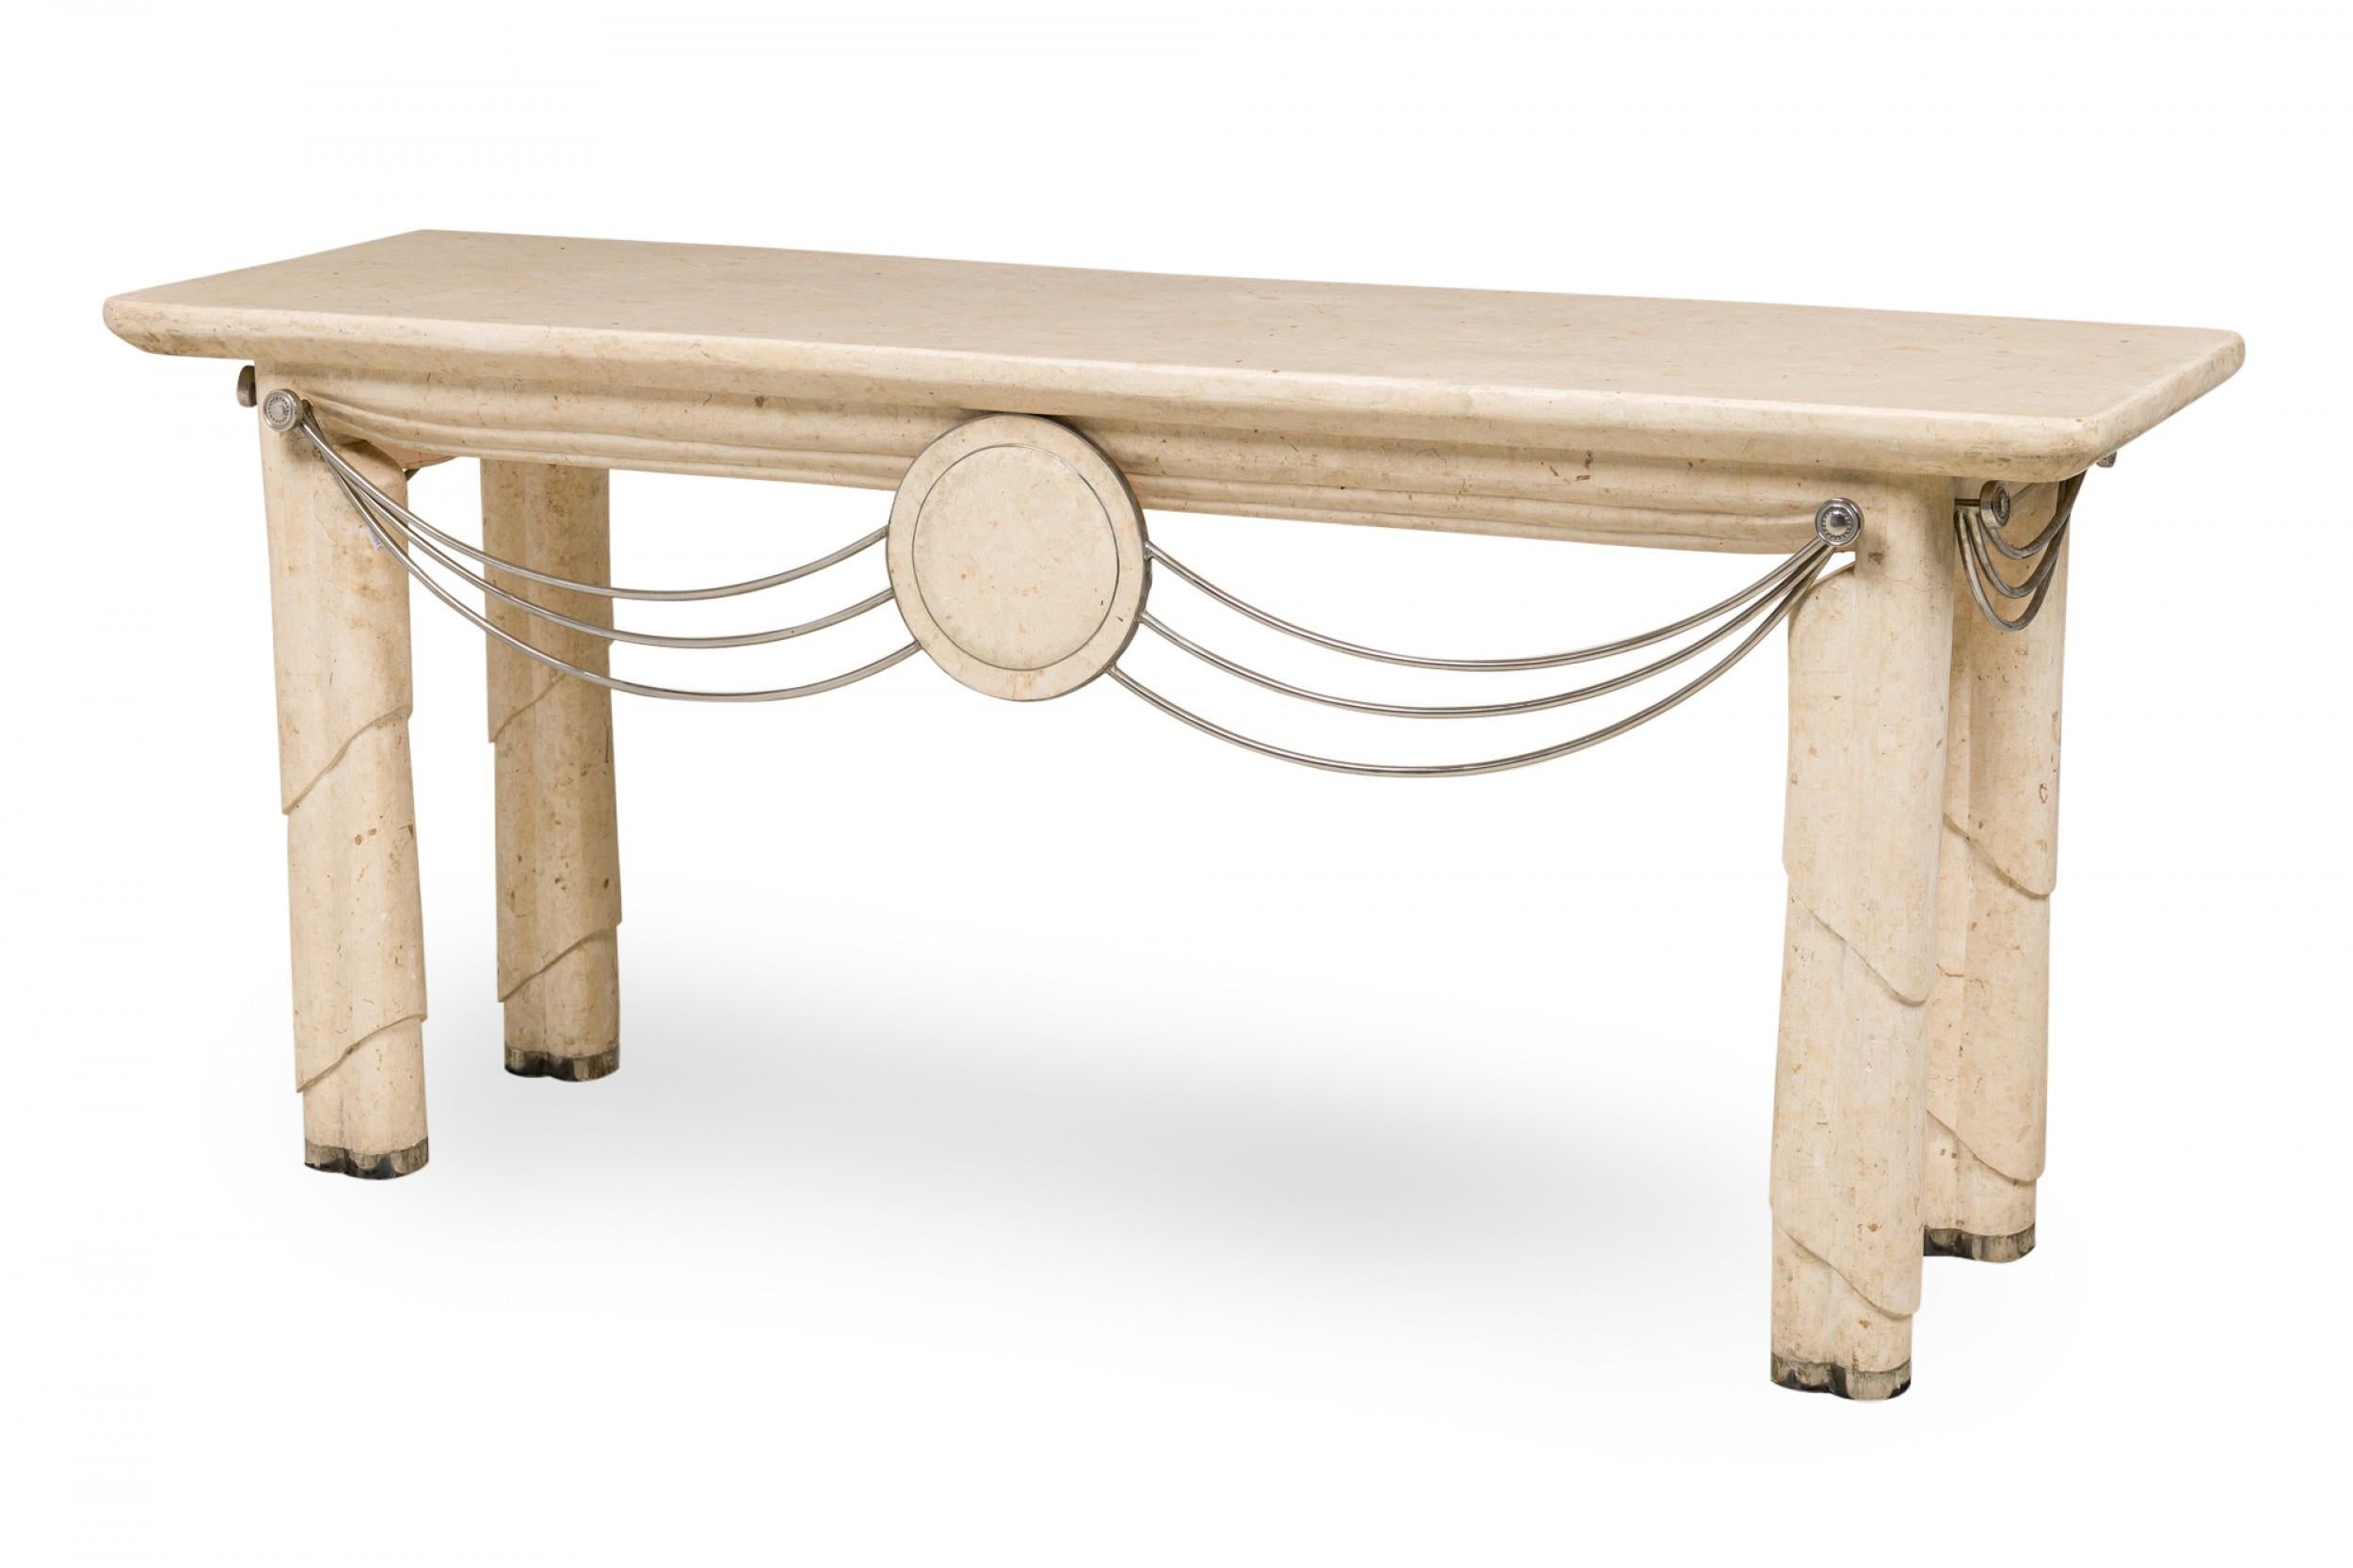 American Mid-Century Modern Travertine and Nickel Console Table, with swag design, Maitland Smith.